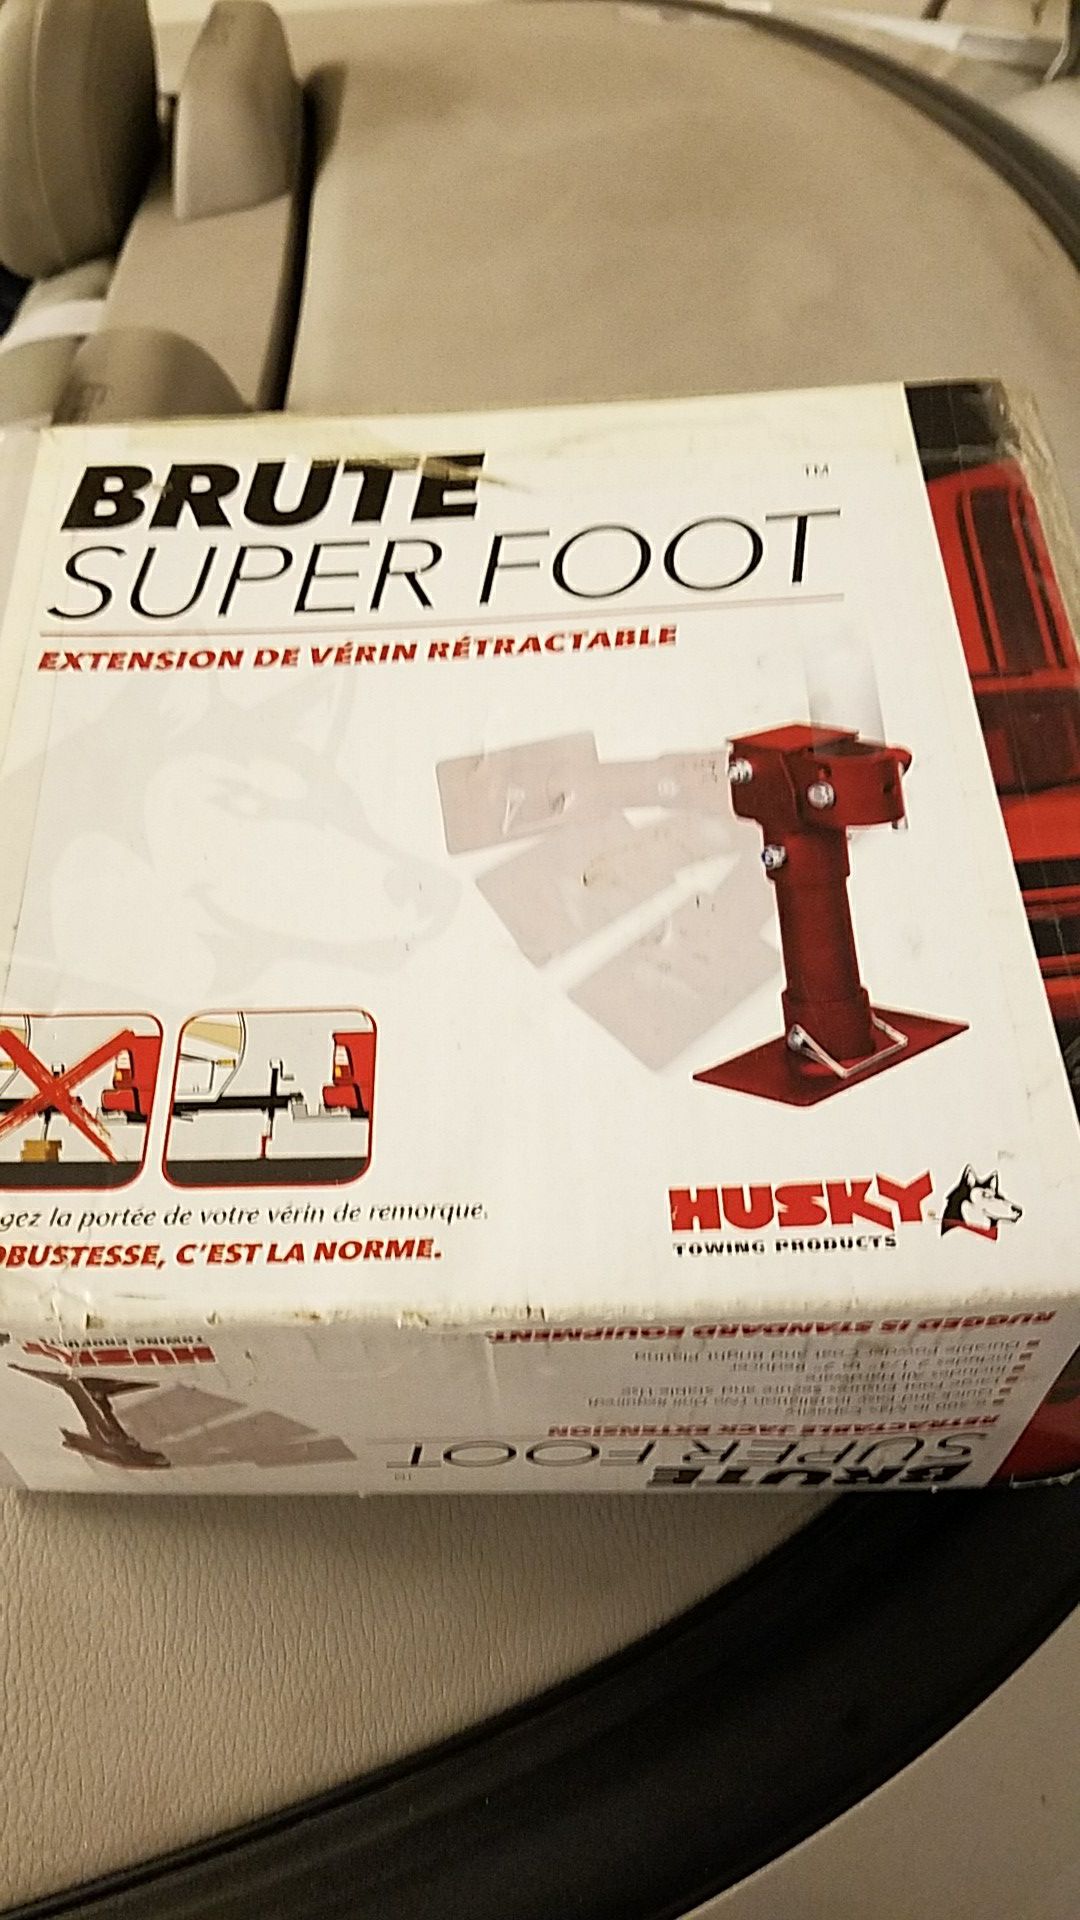 Brute super foot for travel trailer tongue